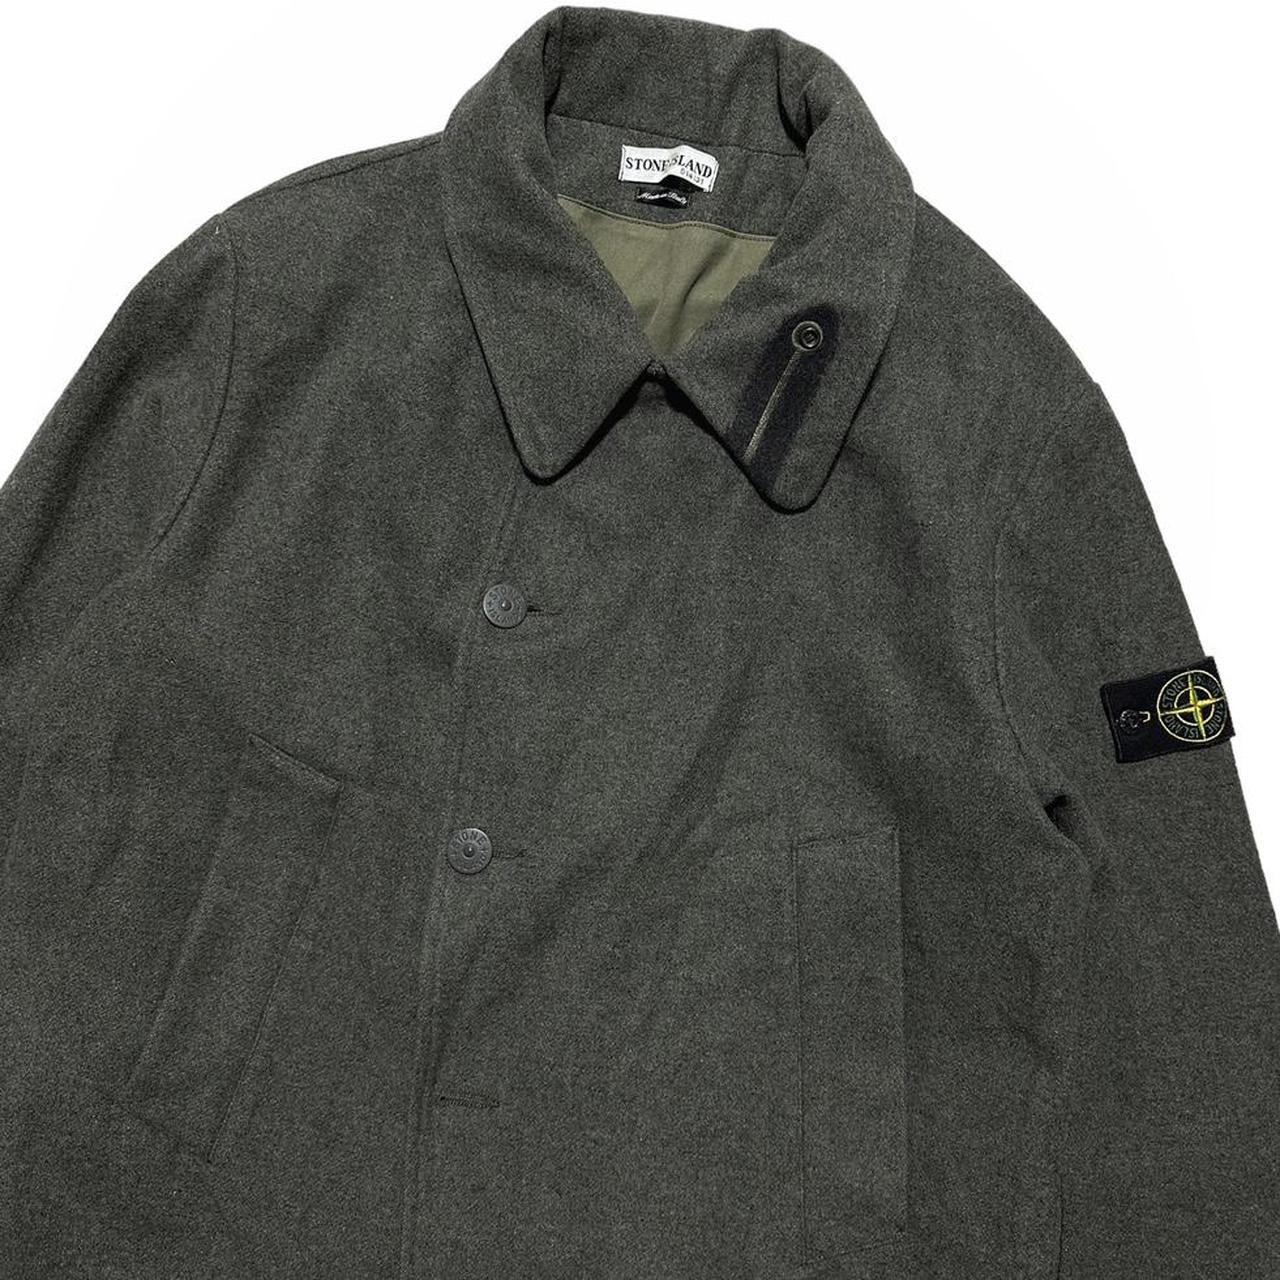 Stone Island Heavy Wool Trench Jacket - Known Source